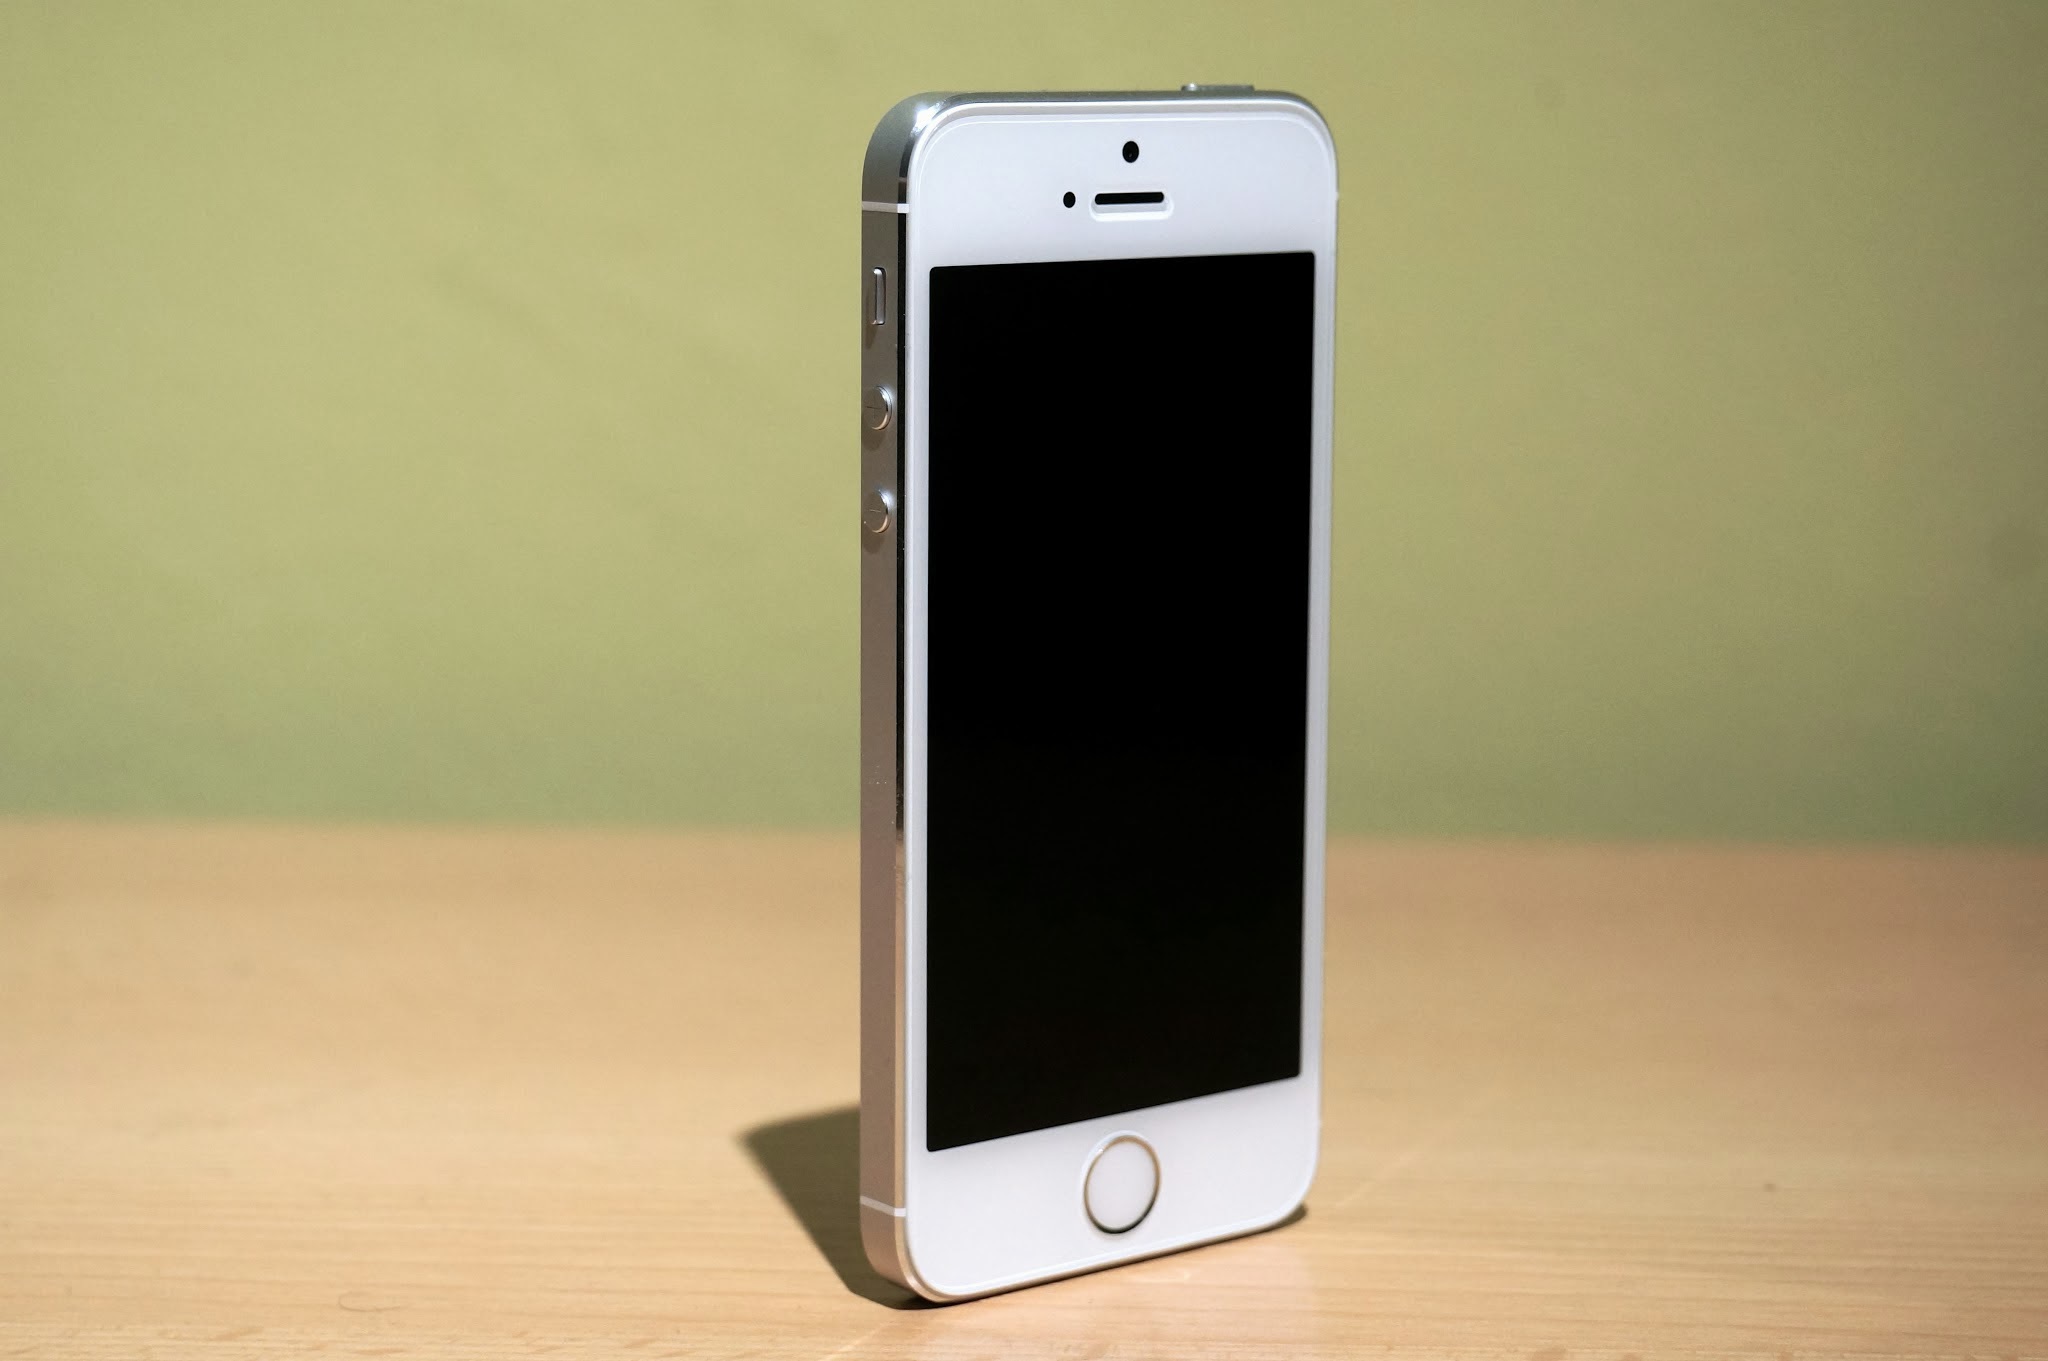 New Iphone 5S on the table wallpapers and images   wallpapers